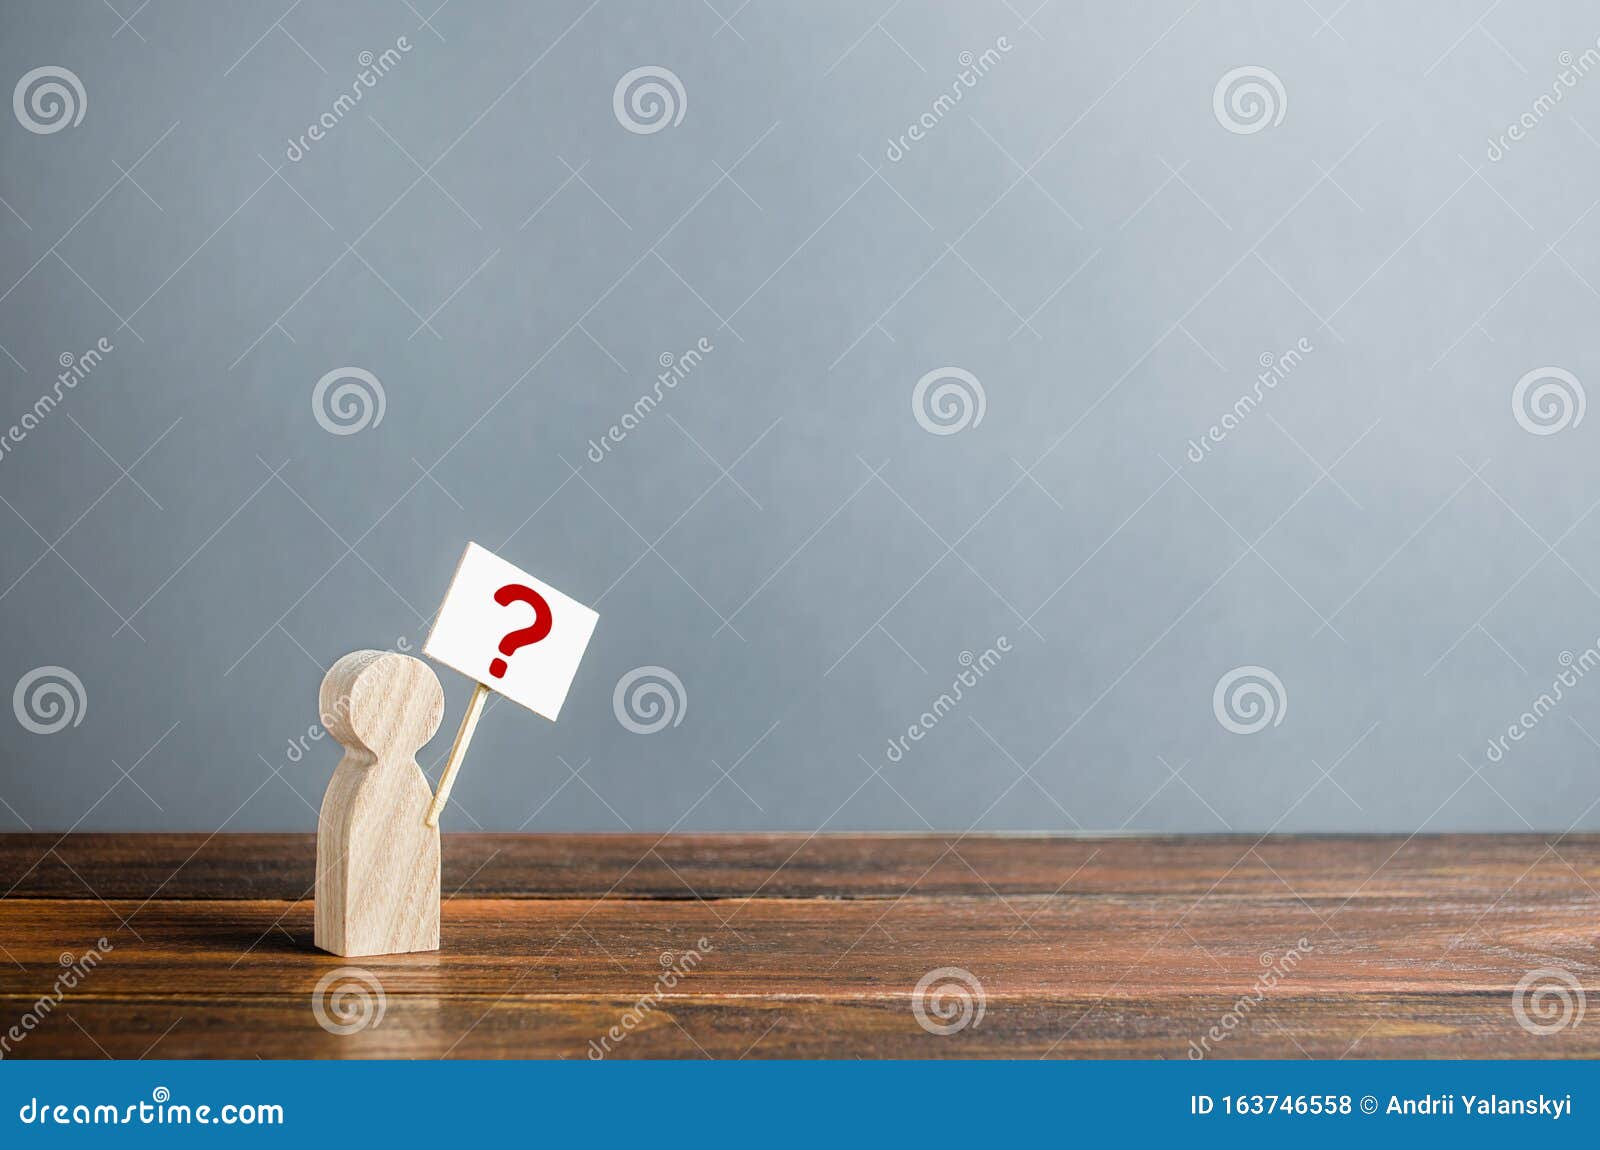 man figurine with a poster and a question mark. asking questions, searching for truth. curiosity, desire to learn more and improve